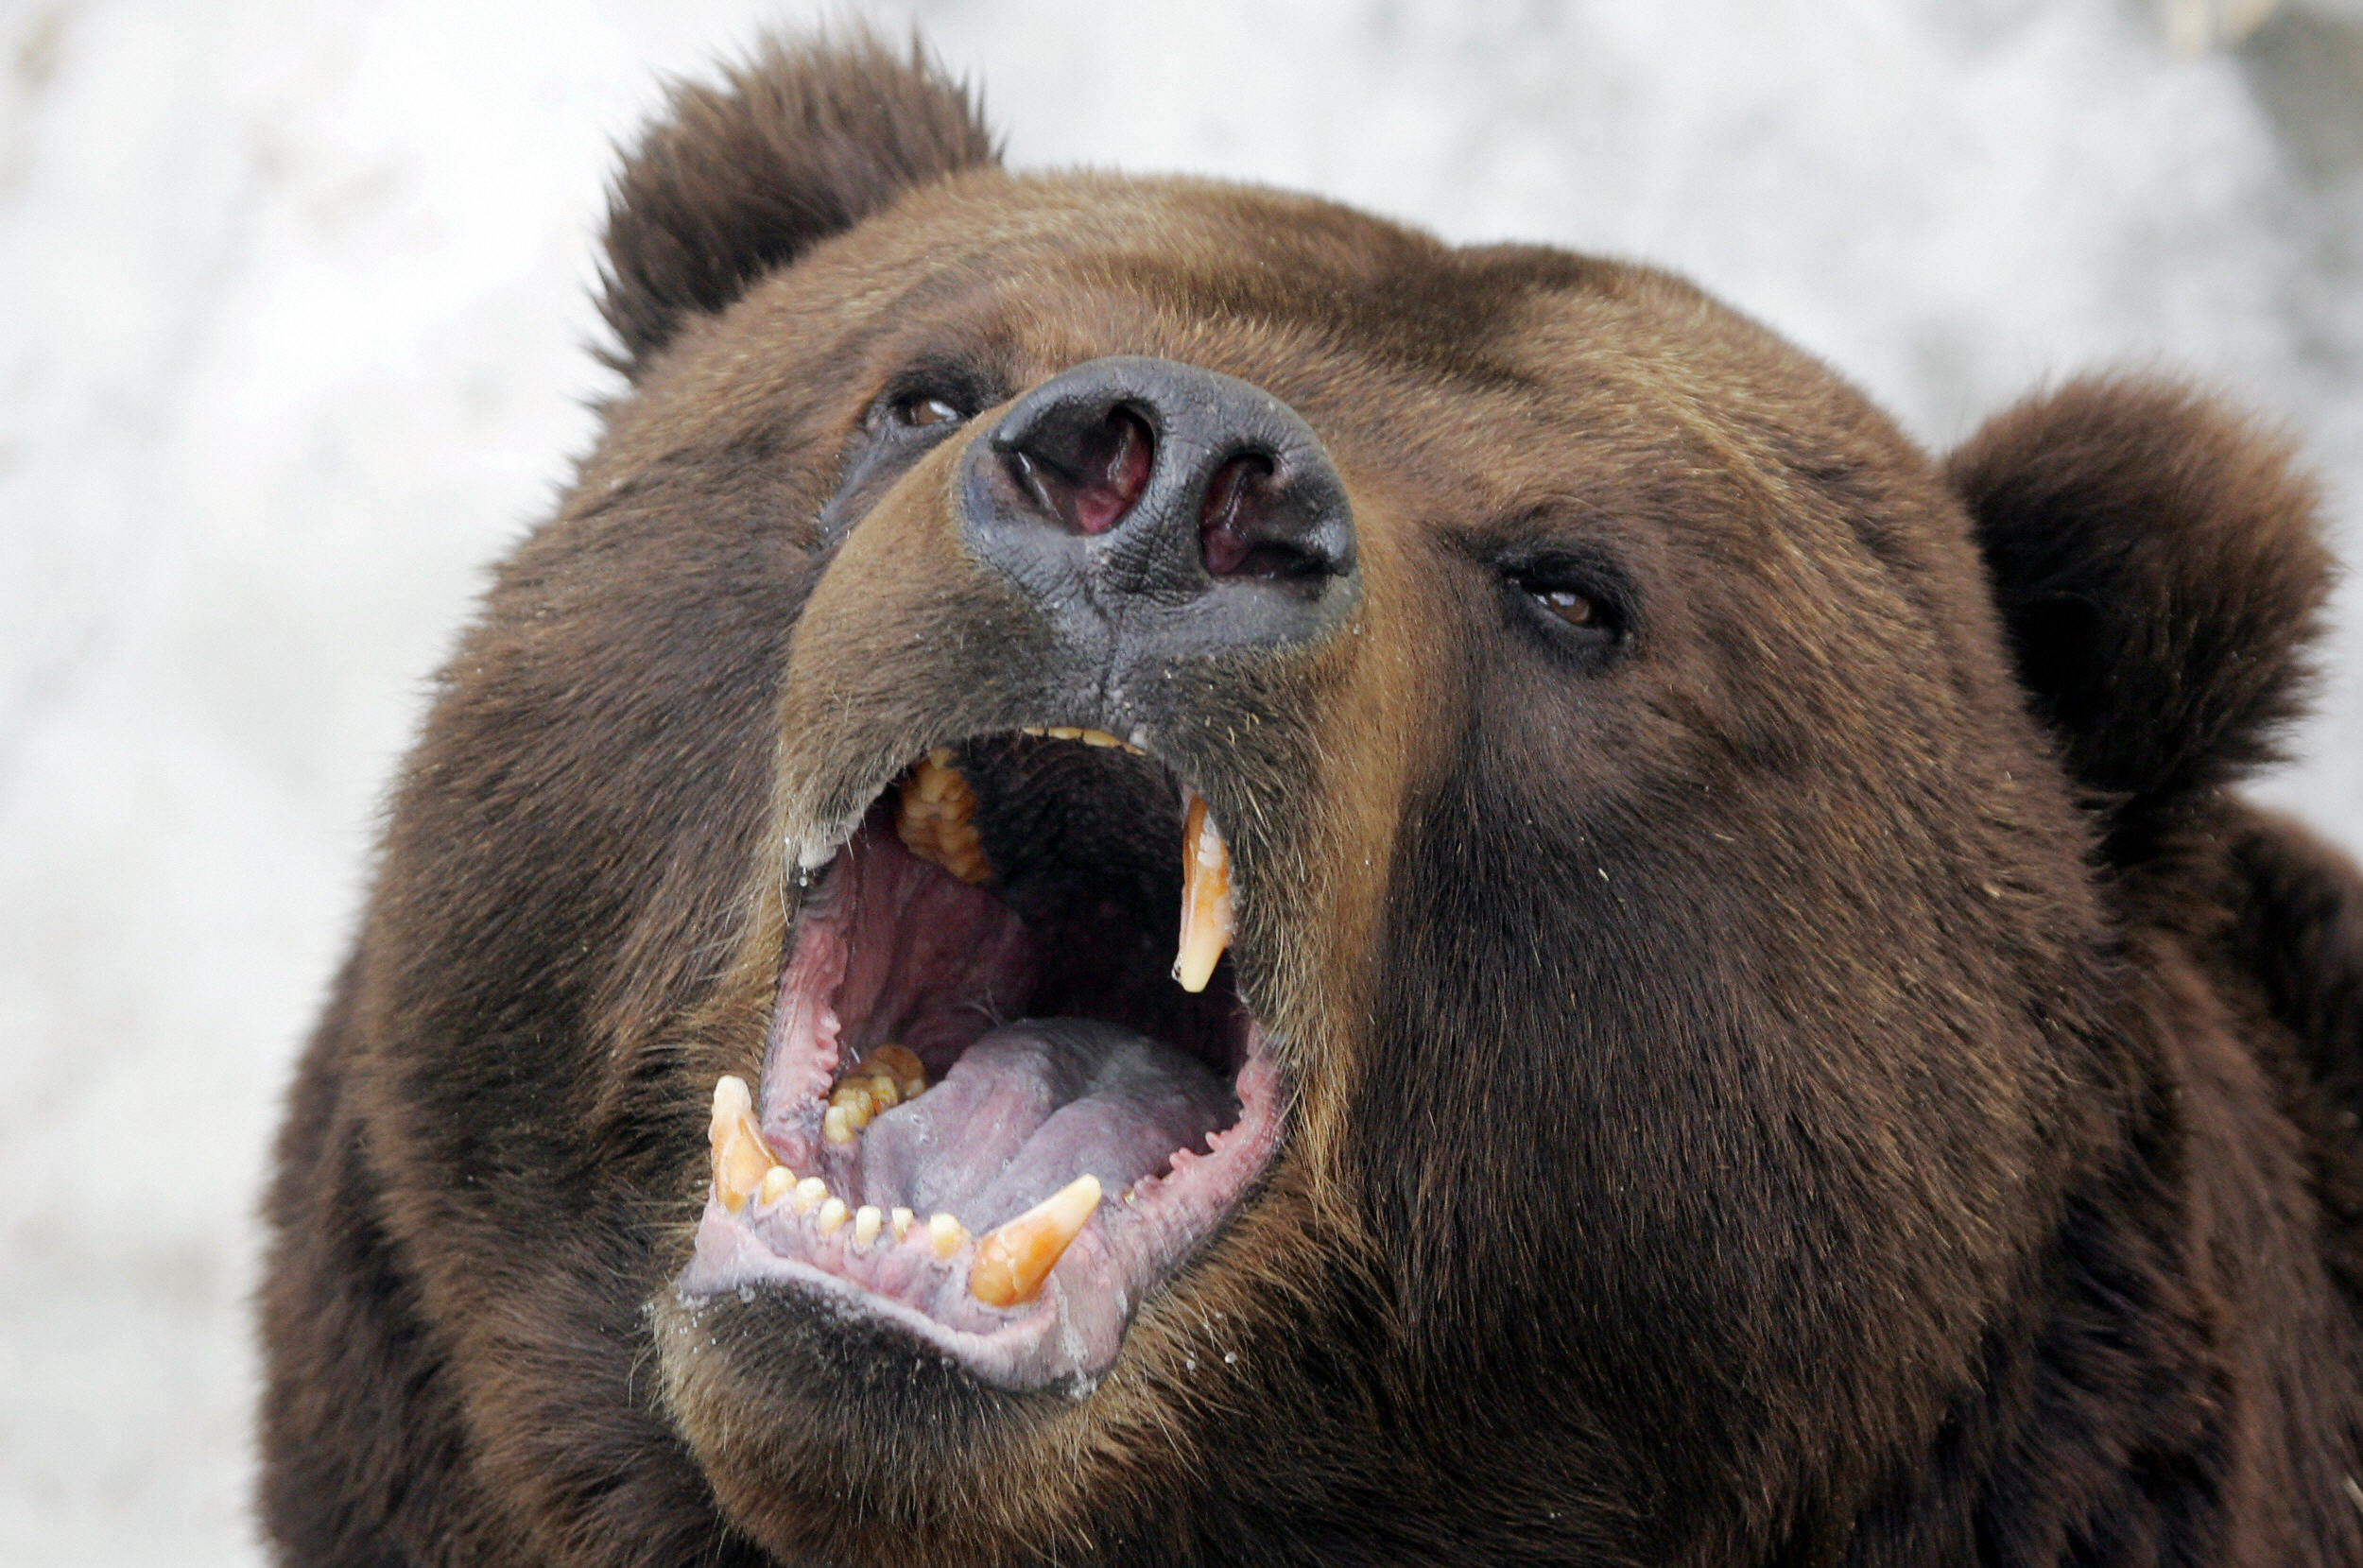 Millionaire fatally shoots man he thought was a bear 